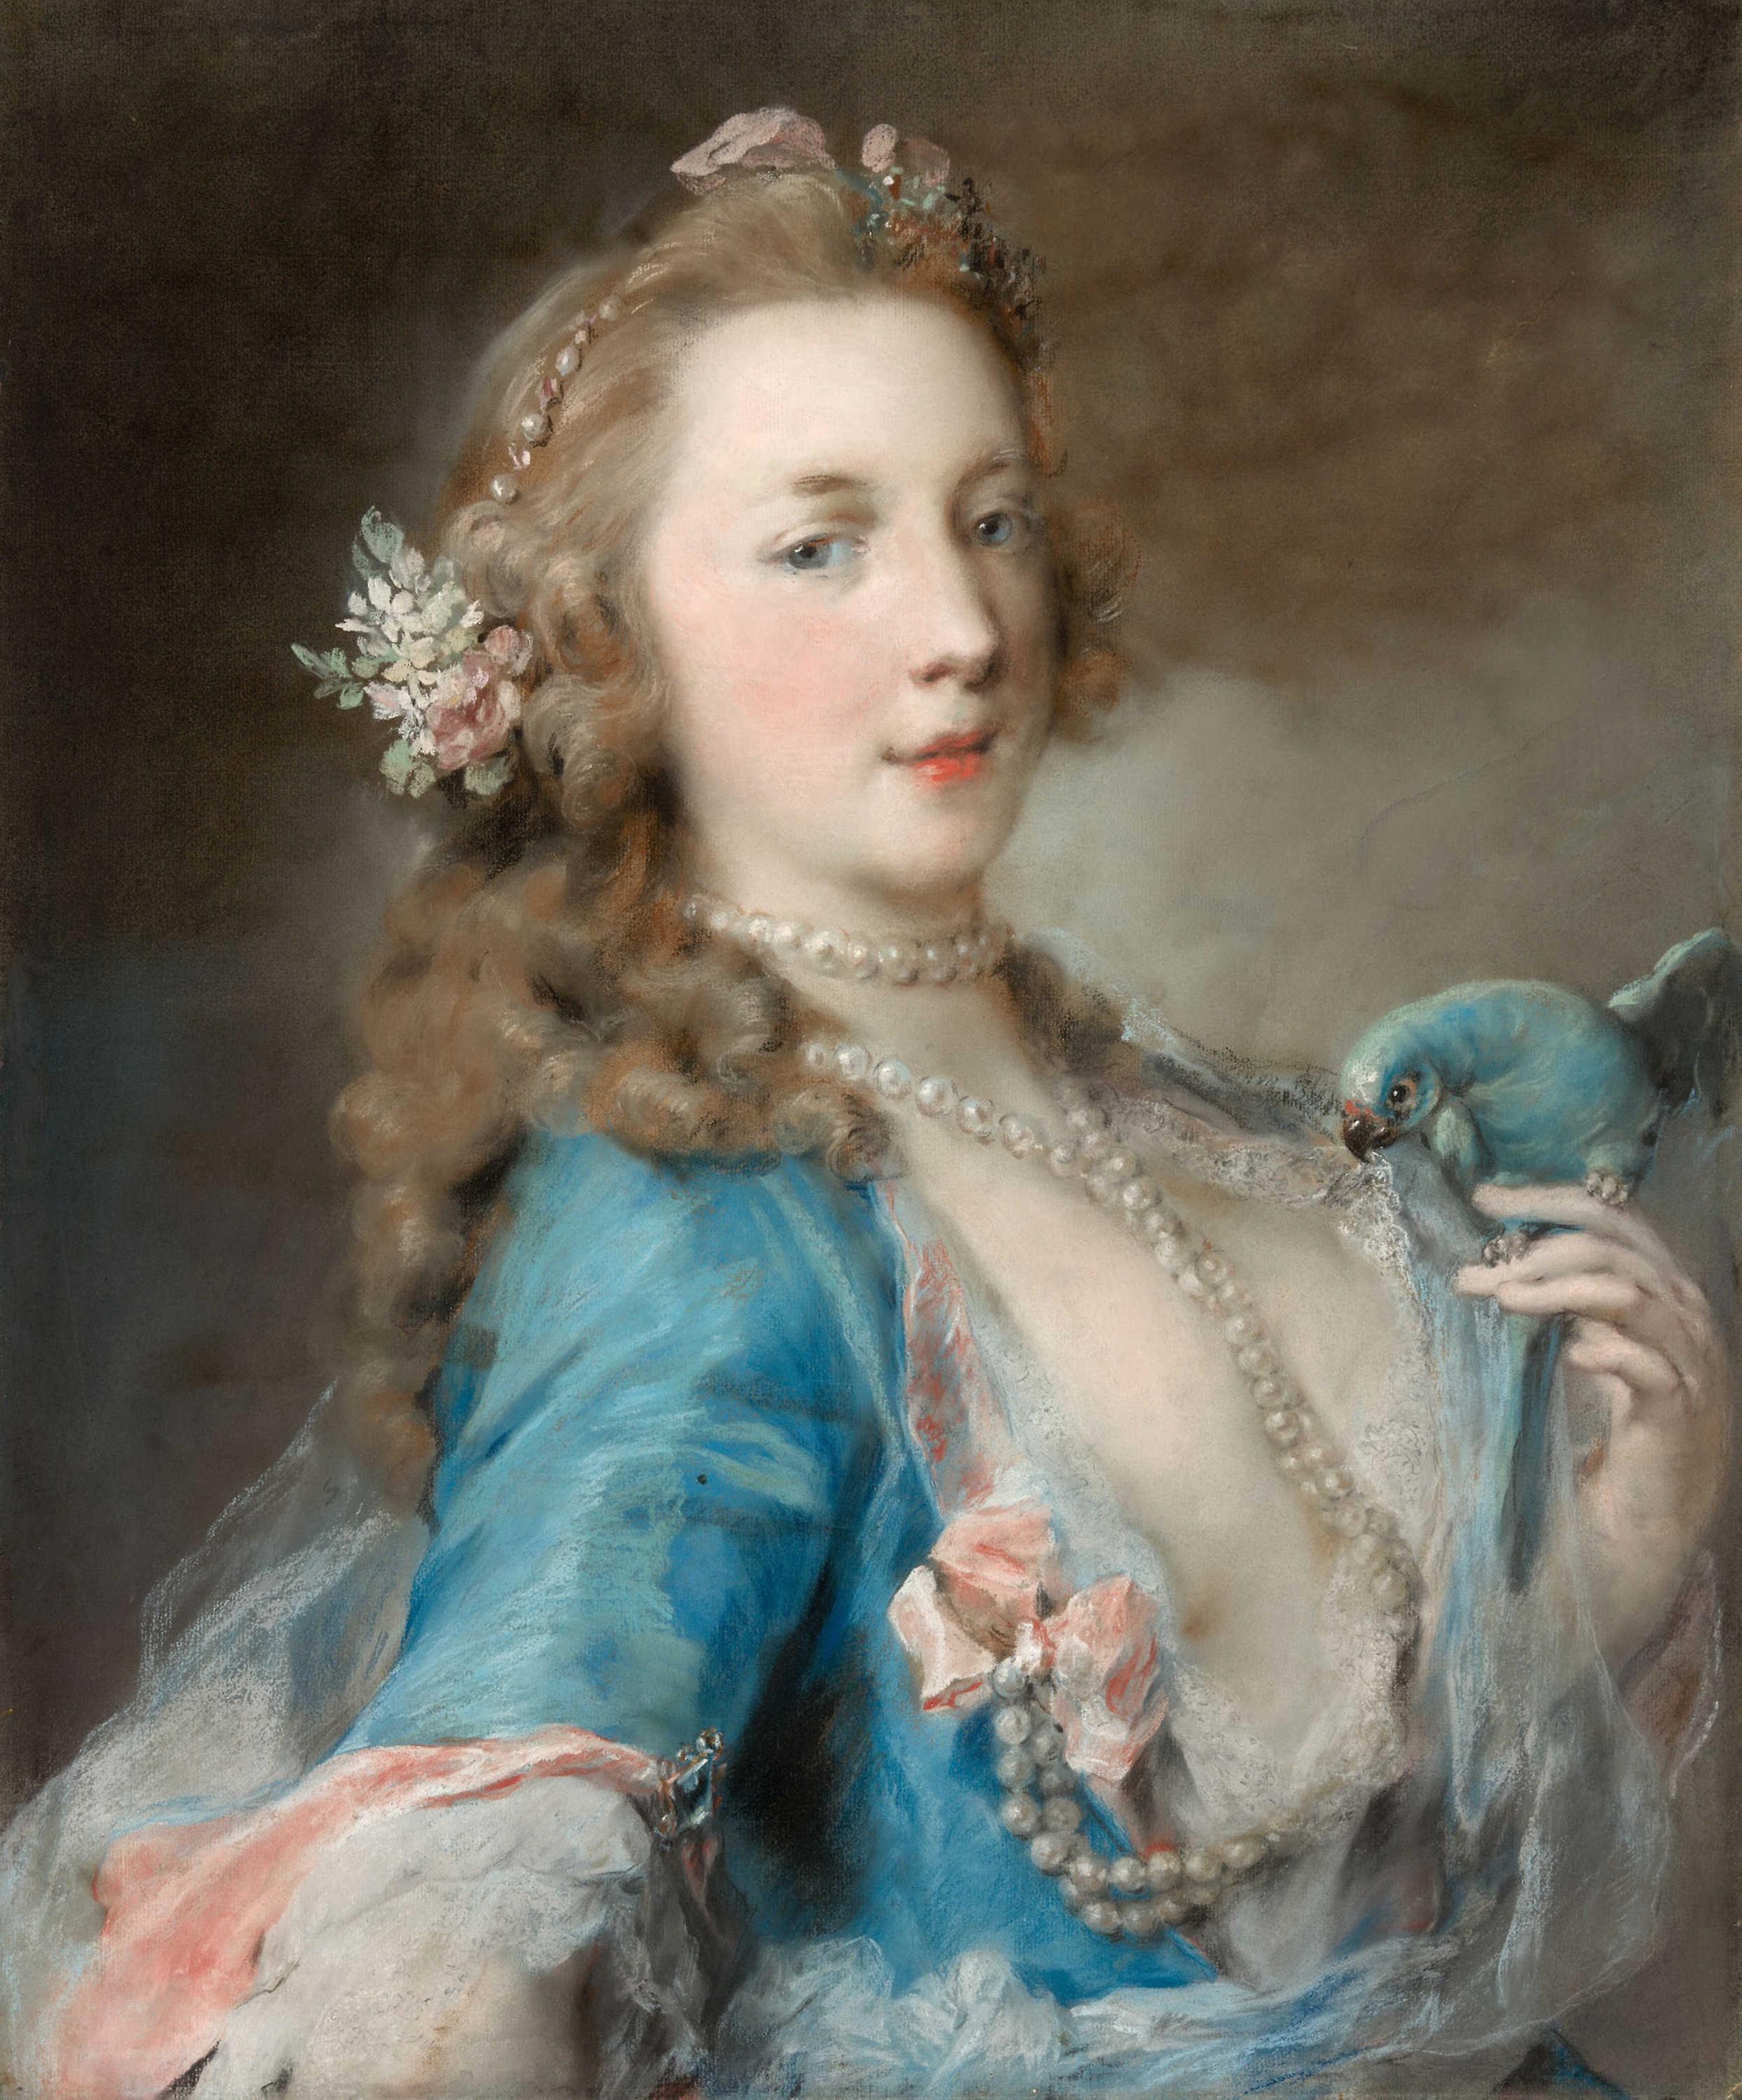 A Young Lady with a Parrot by Rosalba Carriera - c. 1730 - 60 x 50 cm Art Institute of Chicago